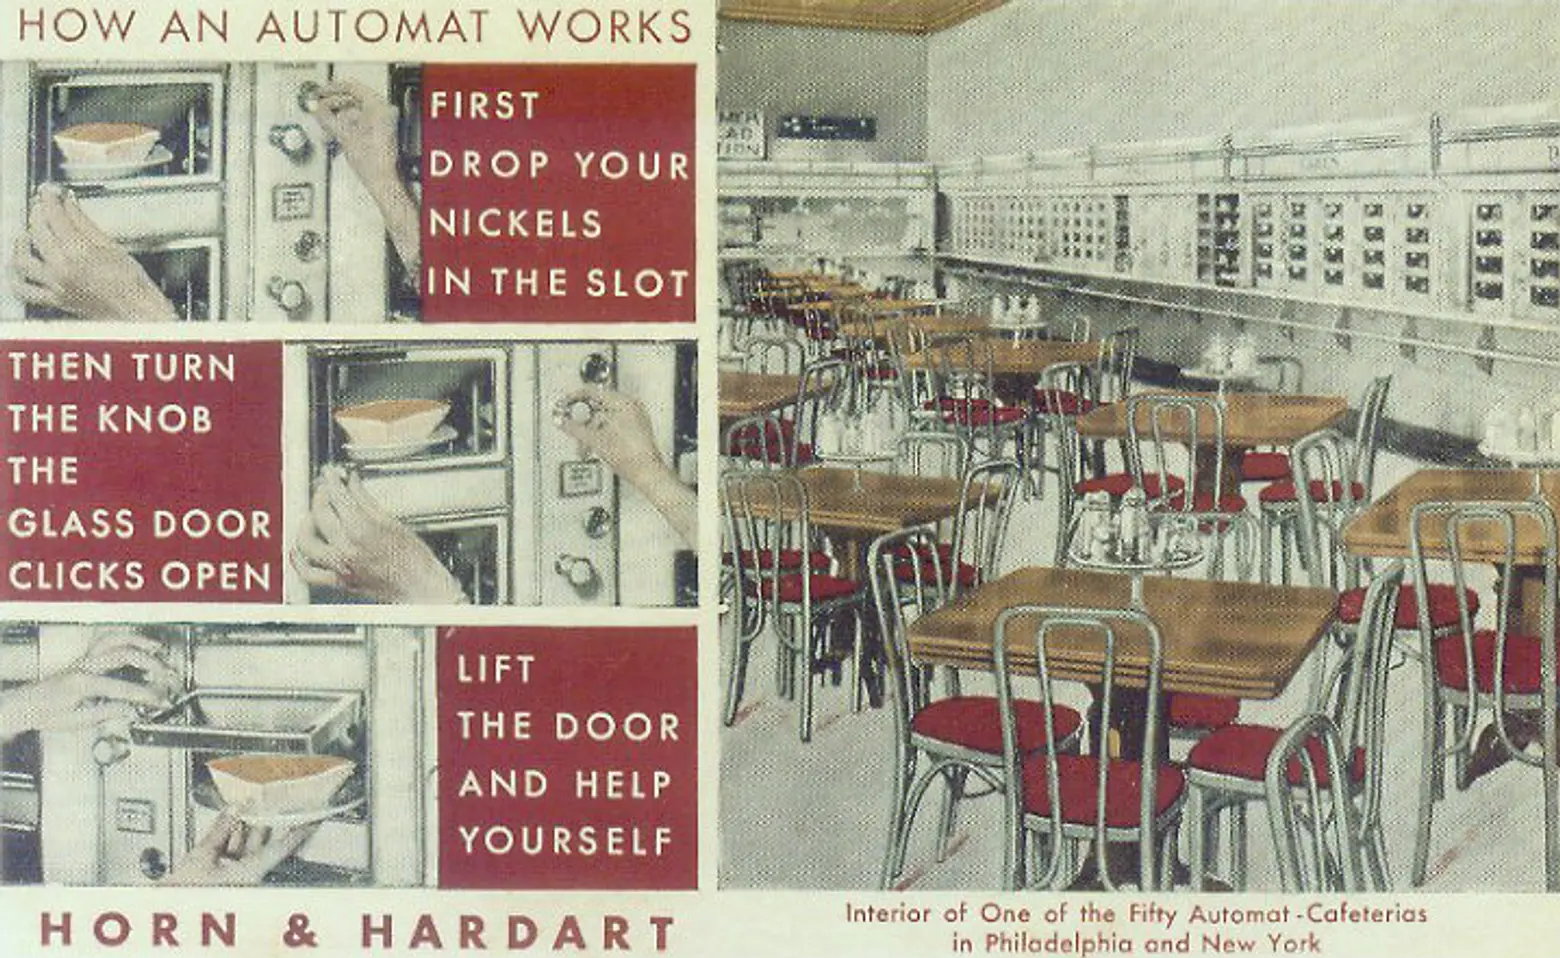 Horn and Hardart Automats: Redefining lunchtime, dining on a dime